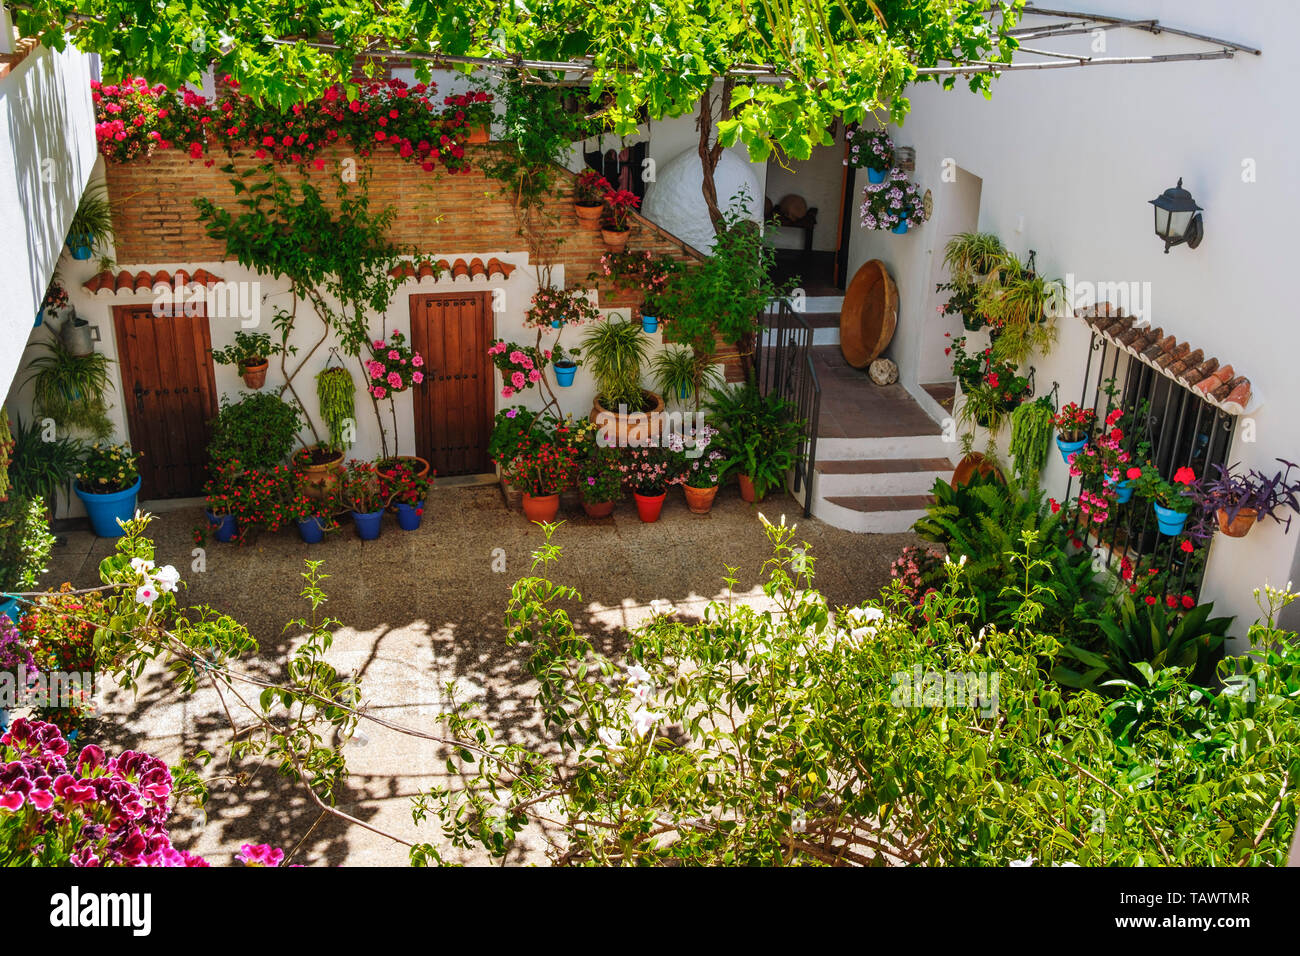 Typical Andalusian patio with flowers. Casa Ethnographic Museum, Mijas Pueblo. Malaga province, Costa del Sol. Andalusia, Spain Europe Stock Photo